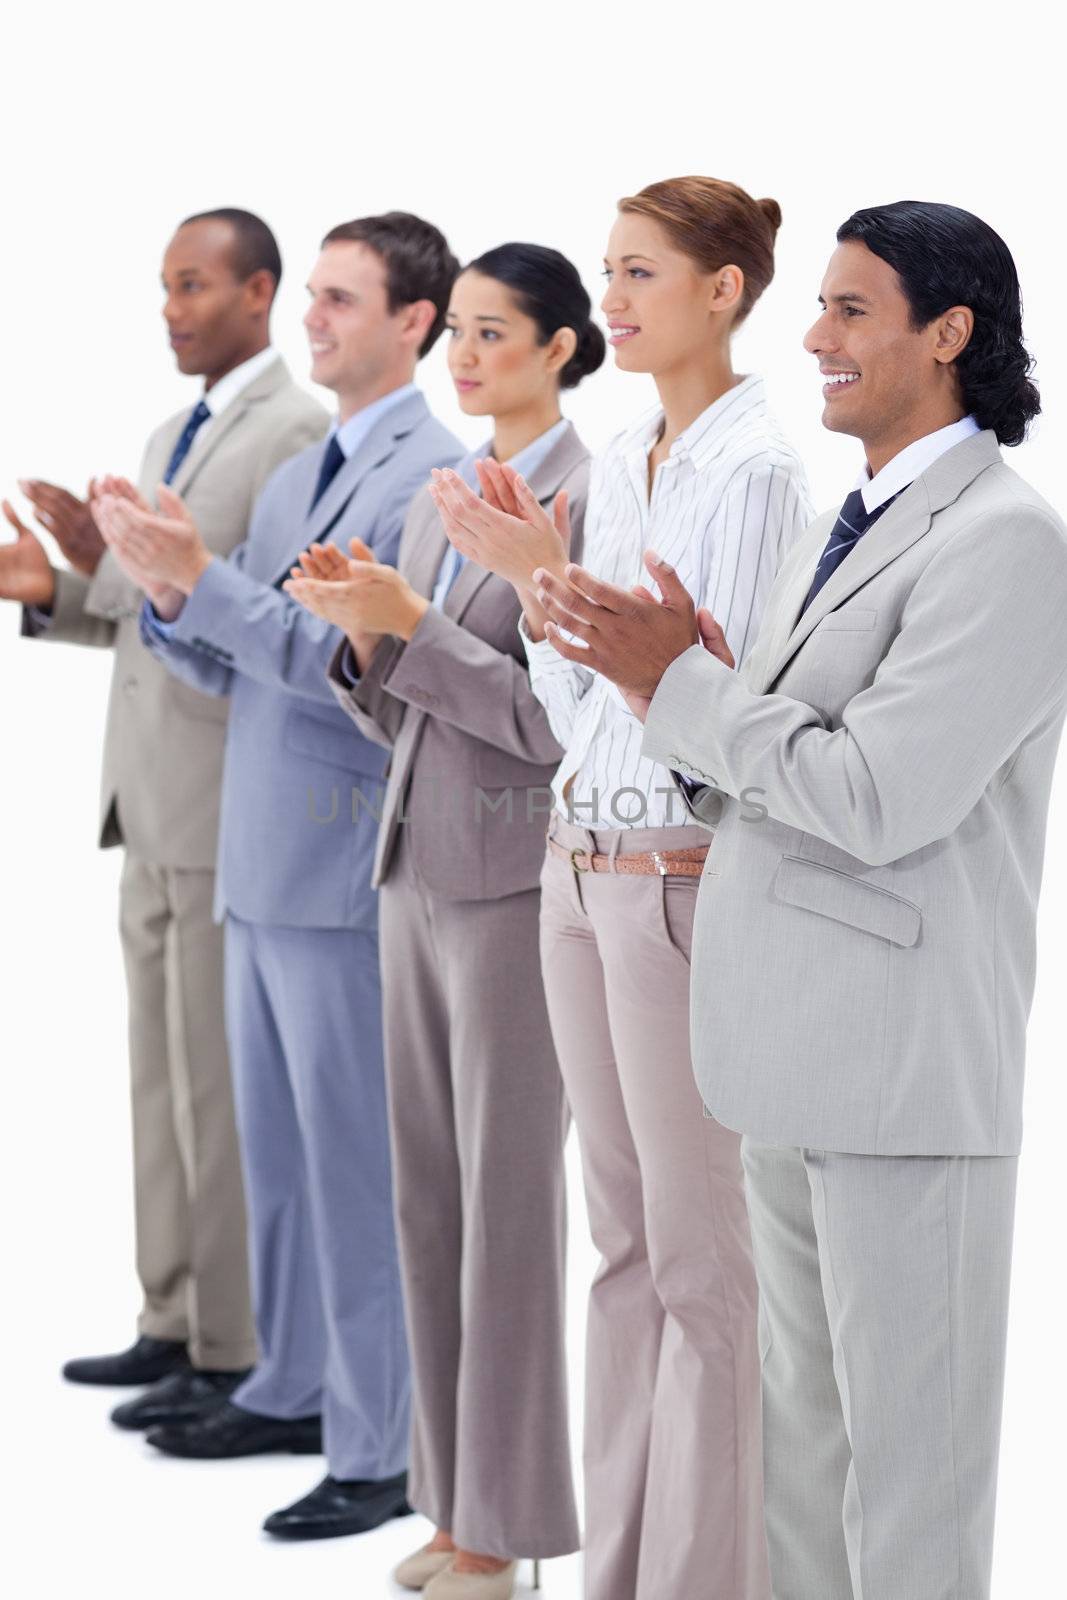 People dressed in suits smiling and applauding by Wavebreakmedia